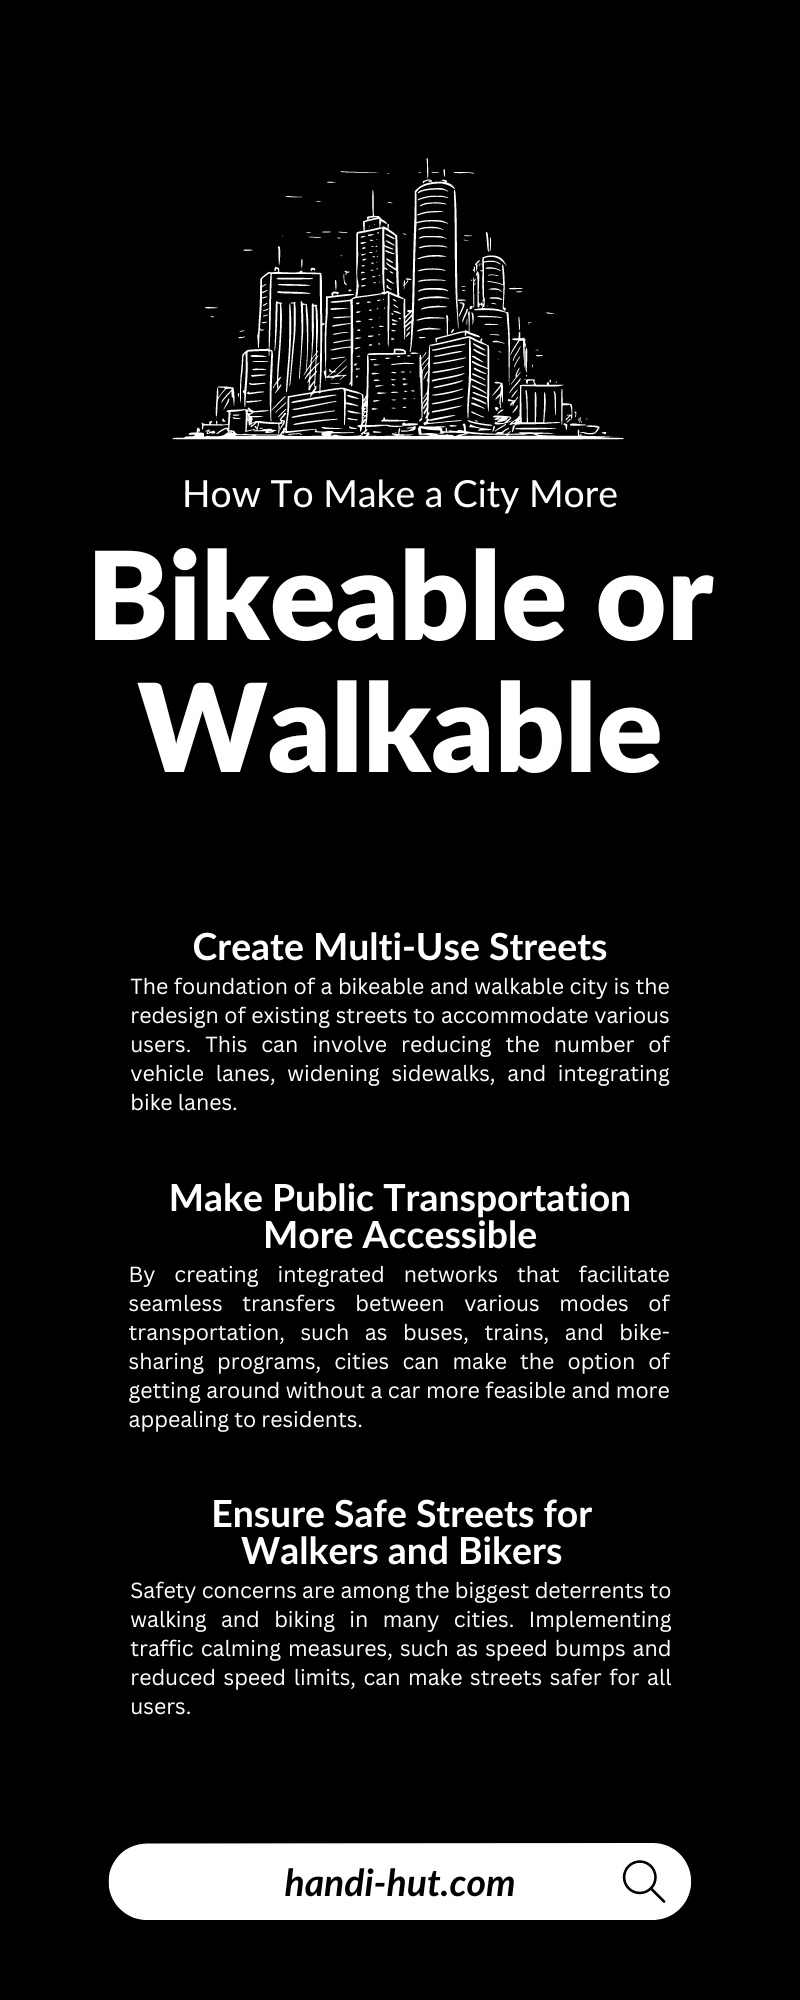 How To Make a City More Bikeable or Walkable